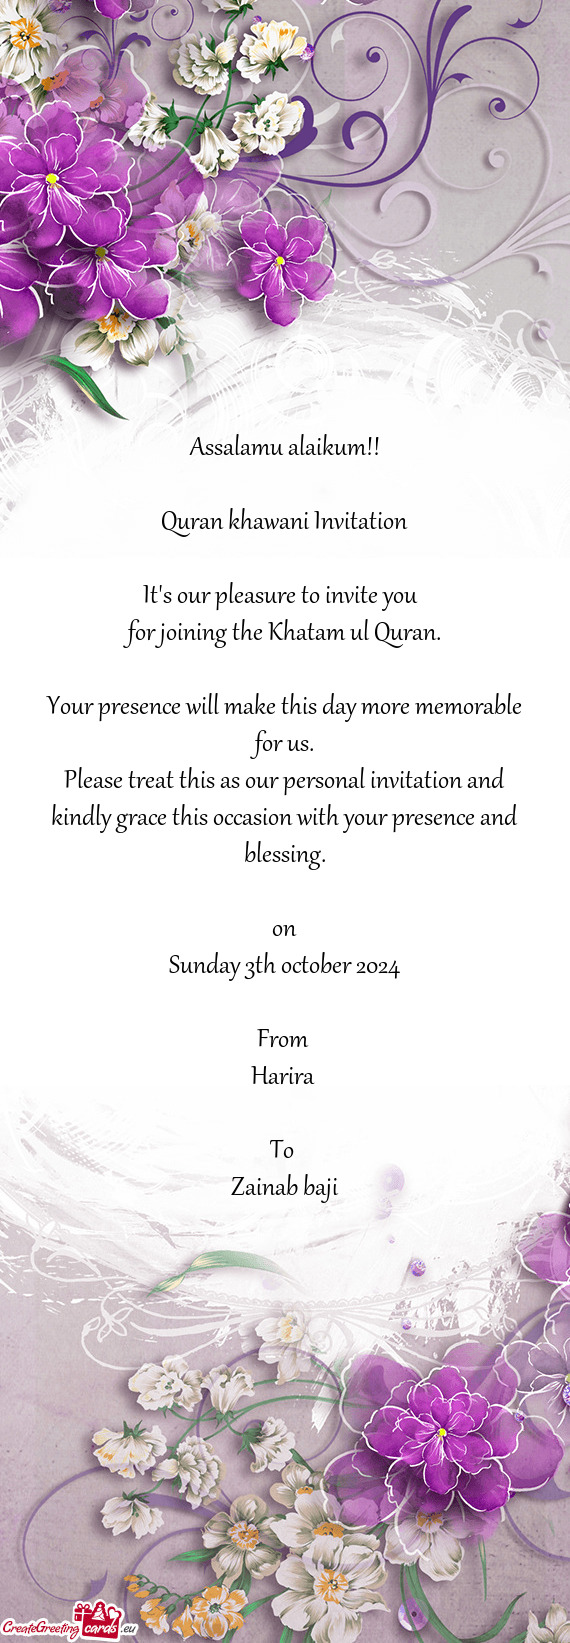 For joining the Khatam ul Quran